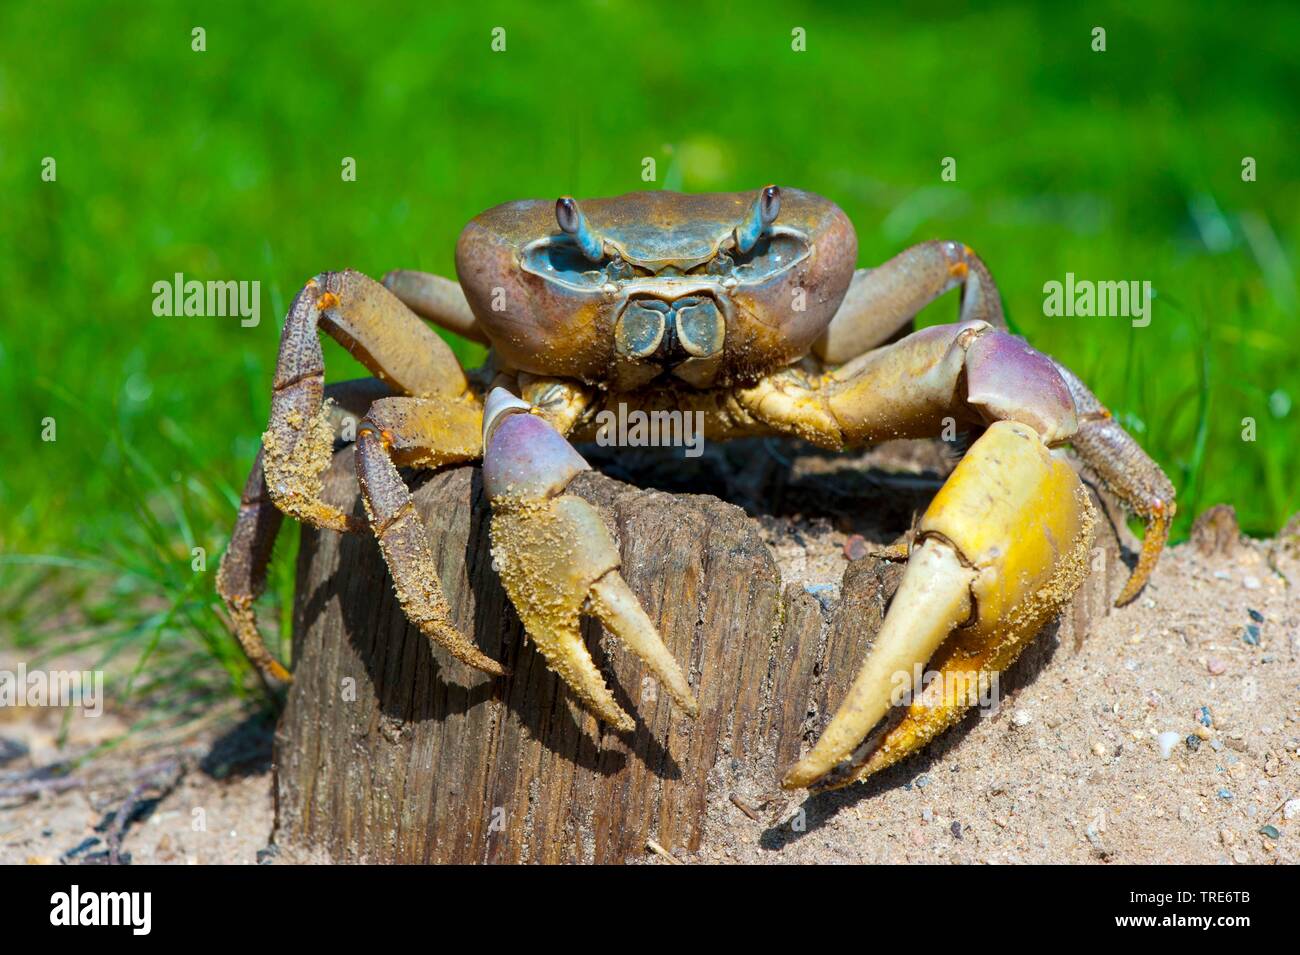 Blue Land crab (Cardisoma carnifex), on a wooden post Stock Photo